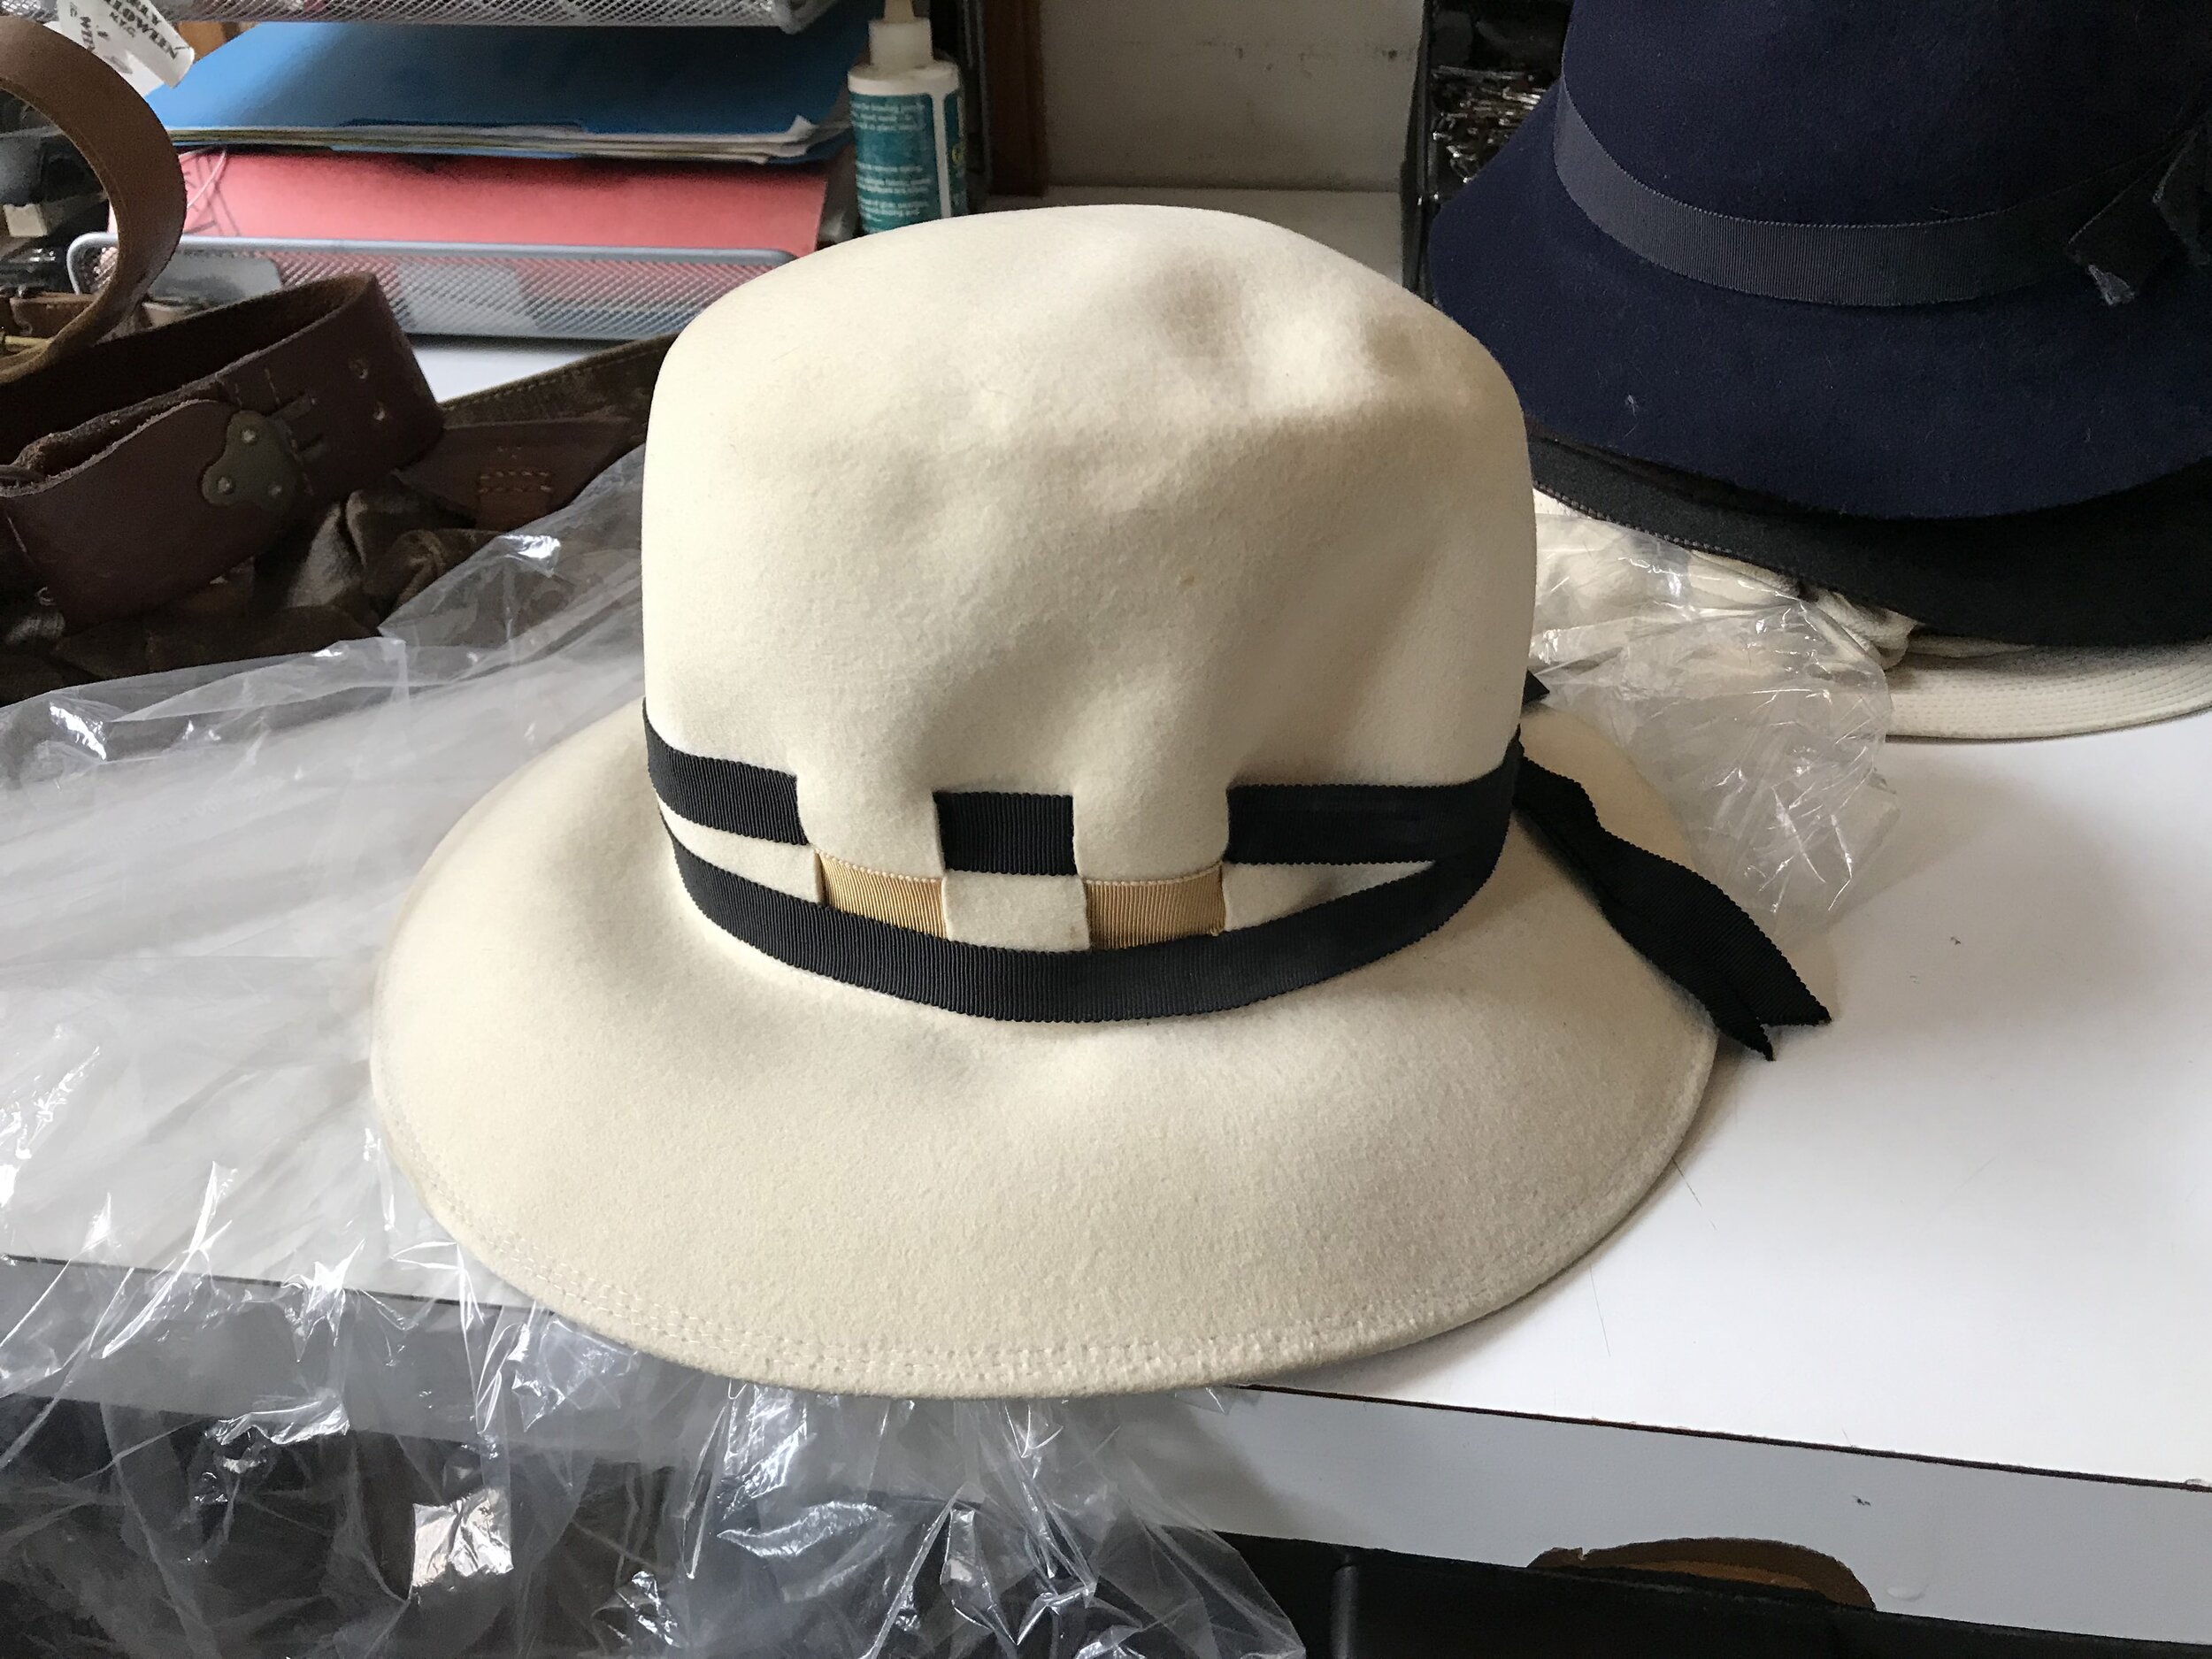 The original vintage hat we were inspired by 